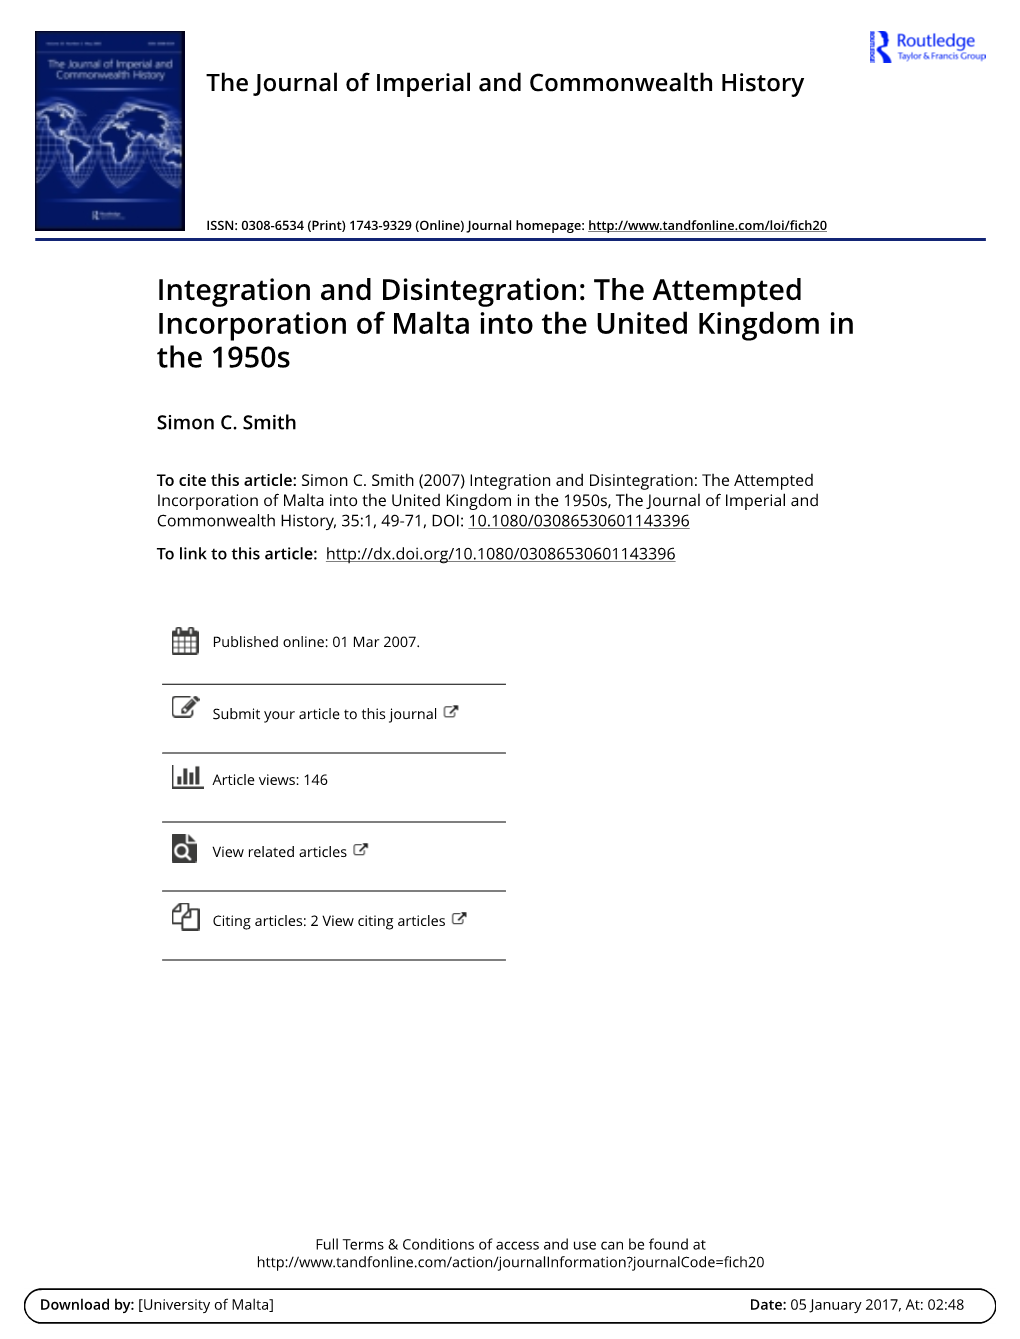 Integration and Disintegration: the Attempted Incorporation of Malta Into the United Kingdom in the 1950S